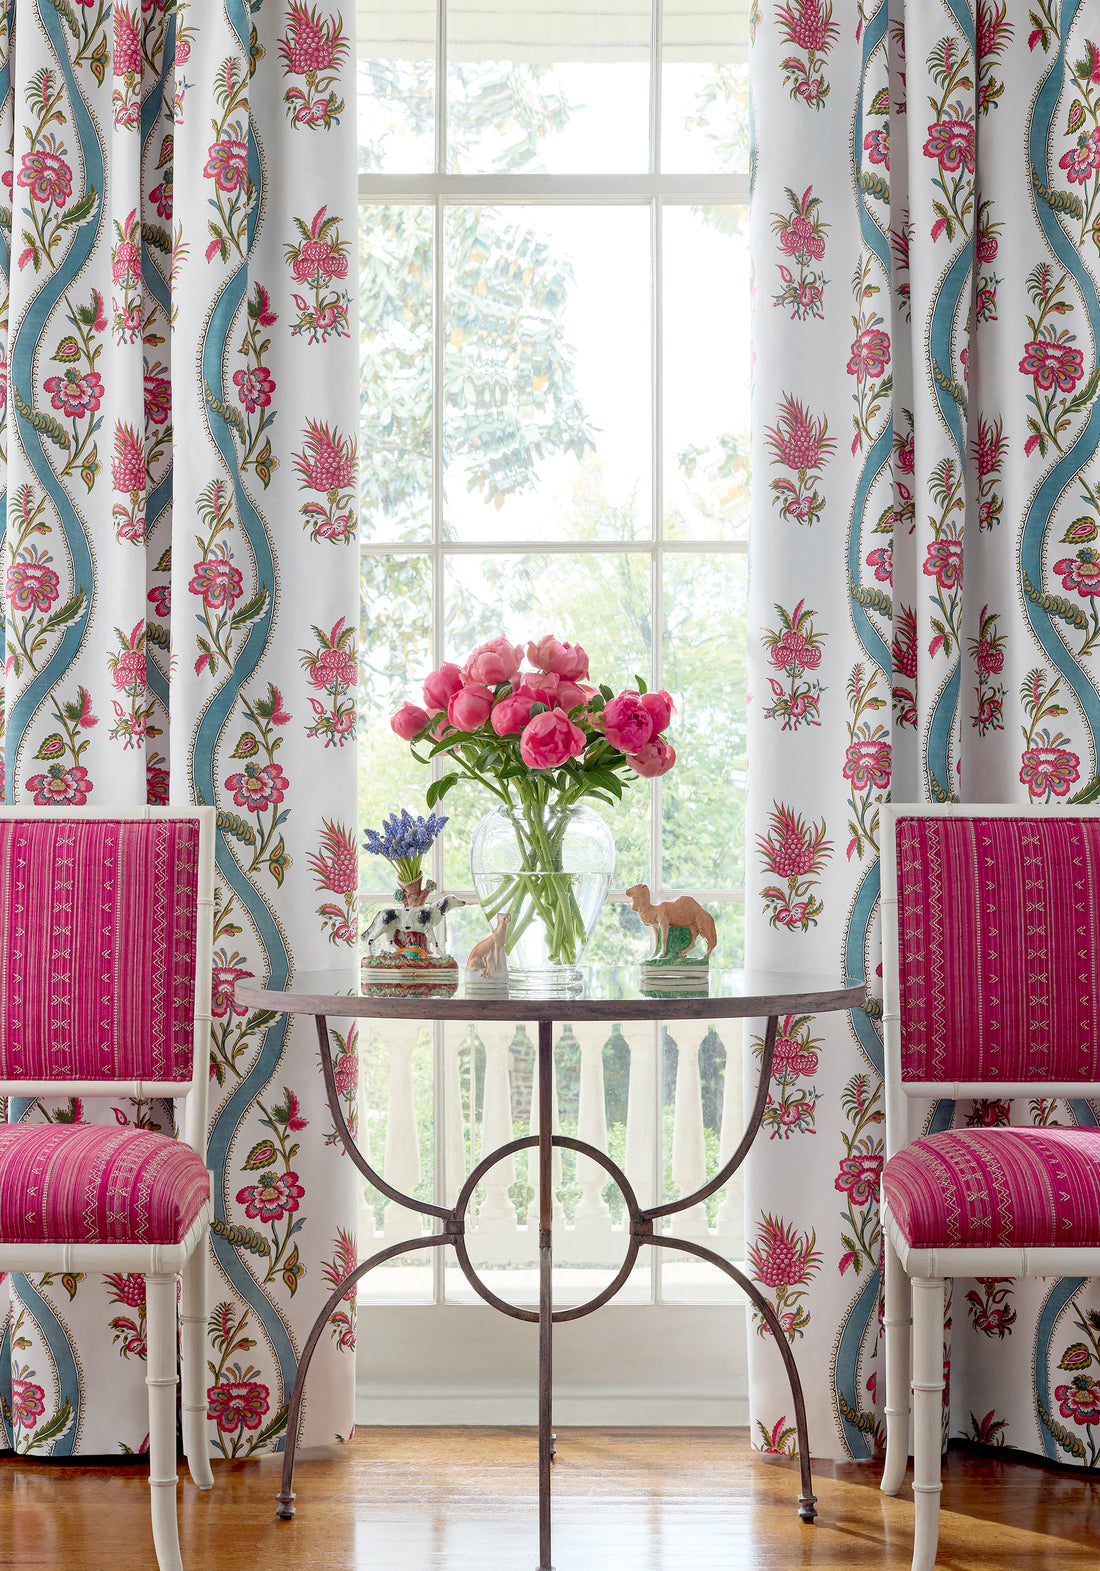 Chairs featuring Charter Stripe Embroidery fabric in raspberry color - pattern number W736454 - by Thibaut in the Indienne collection